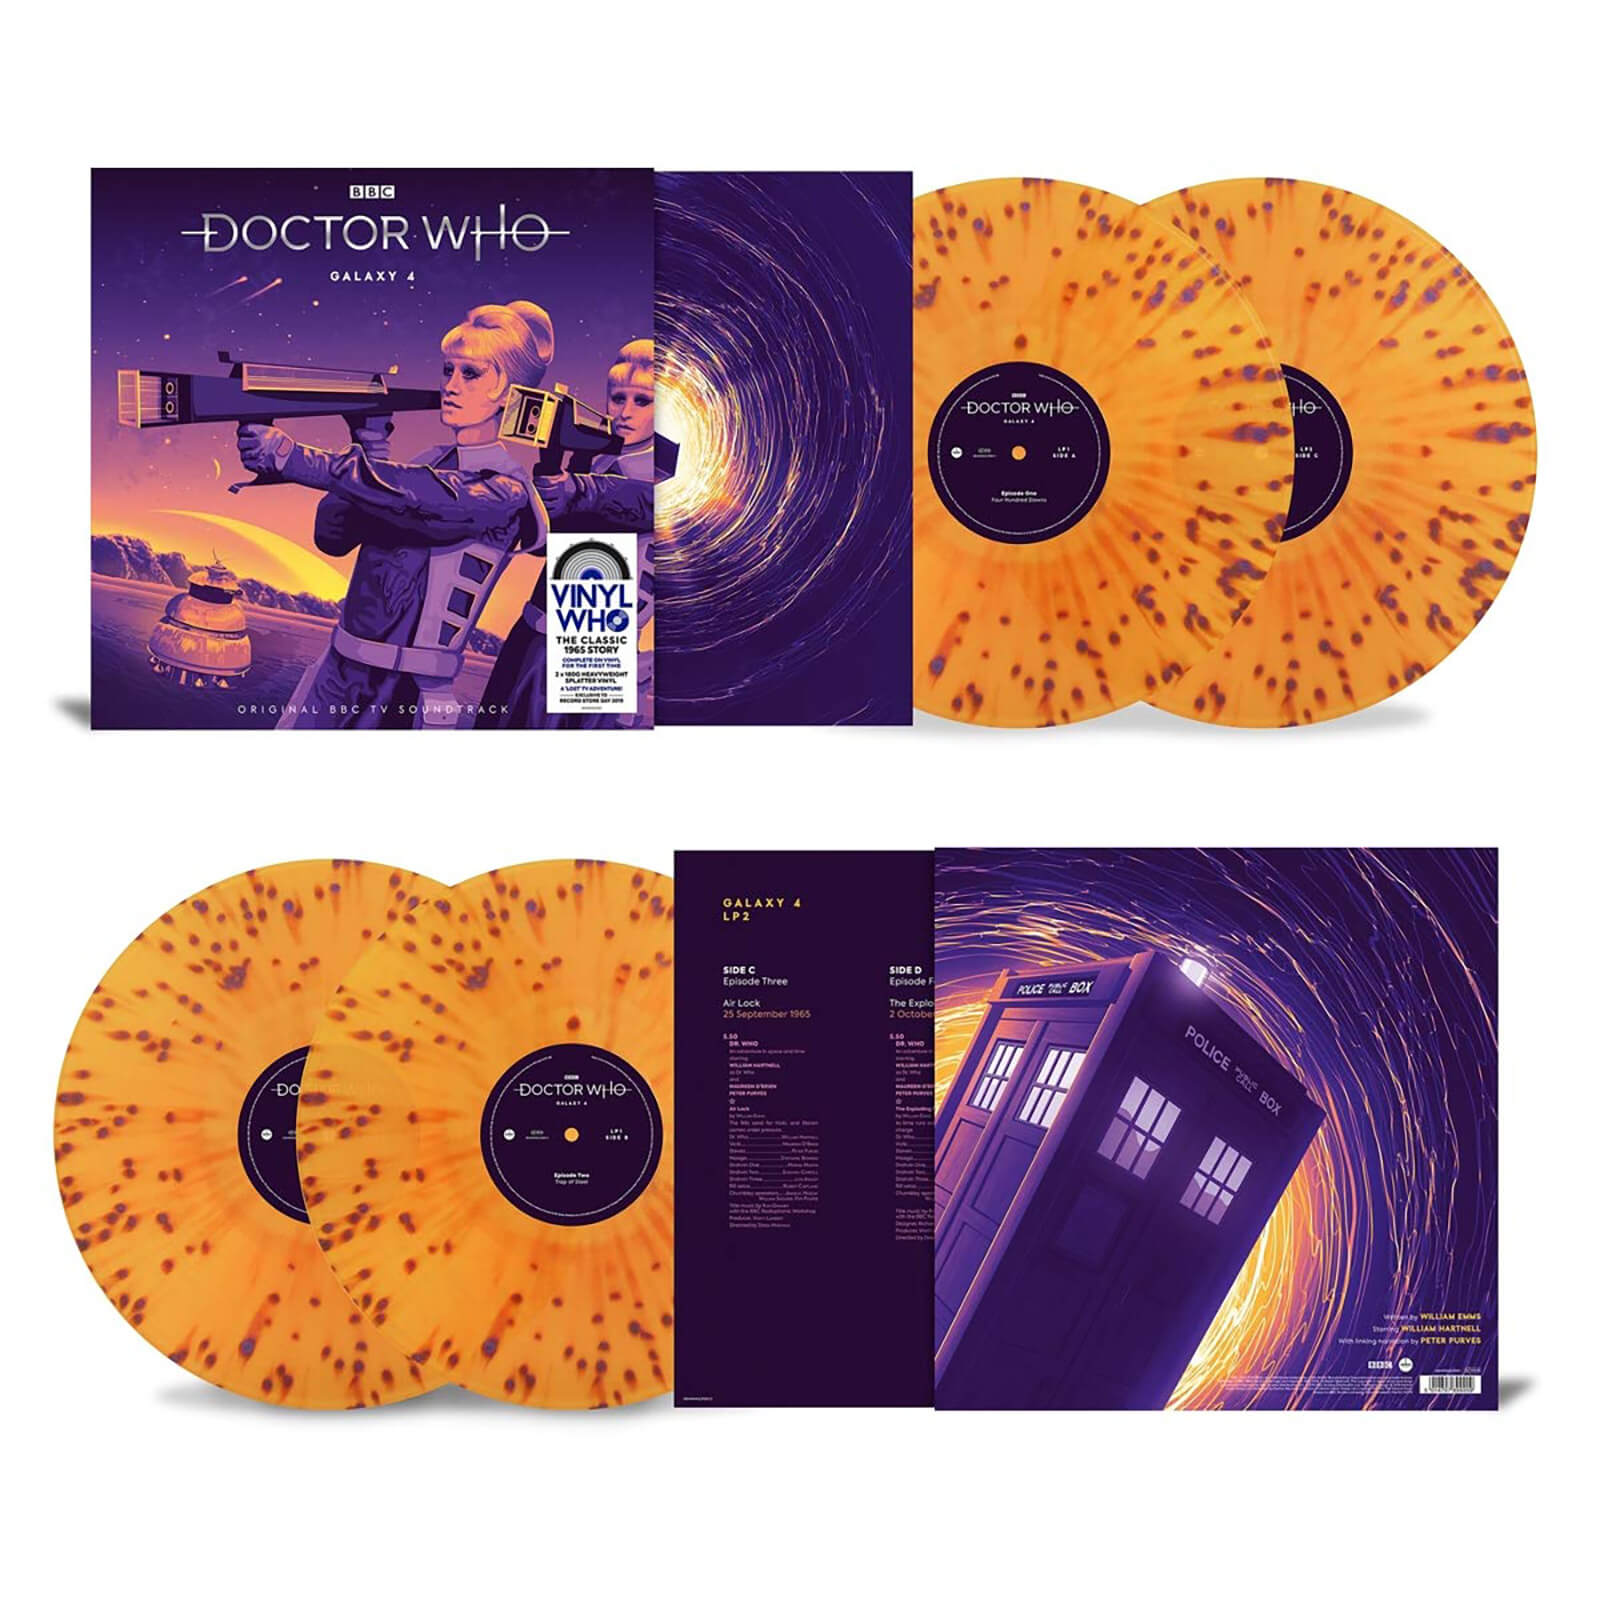 Doctor Who - Galaxy 4 2x LP